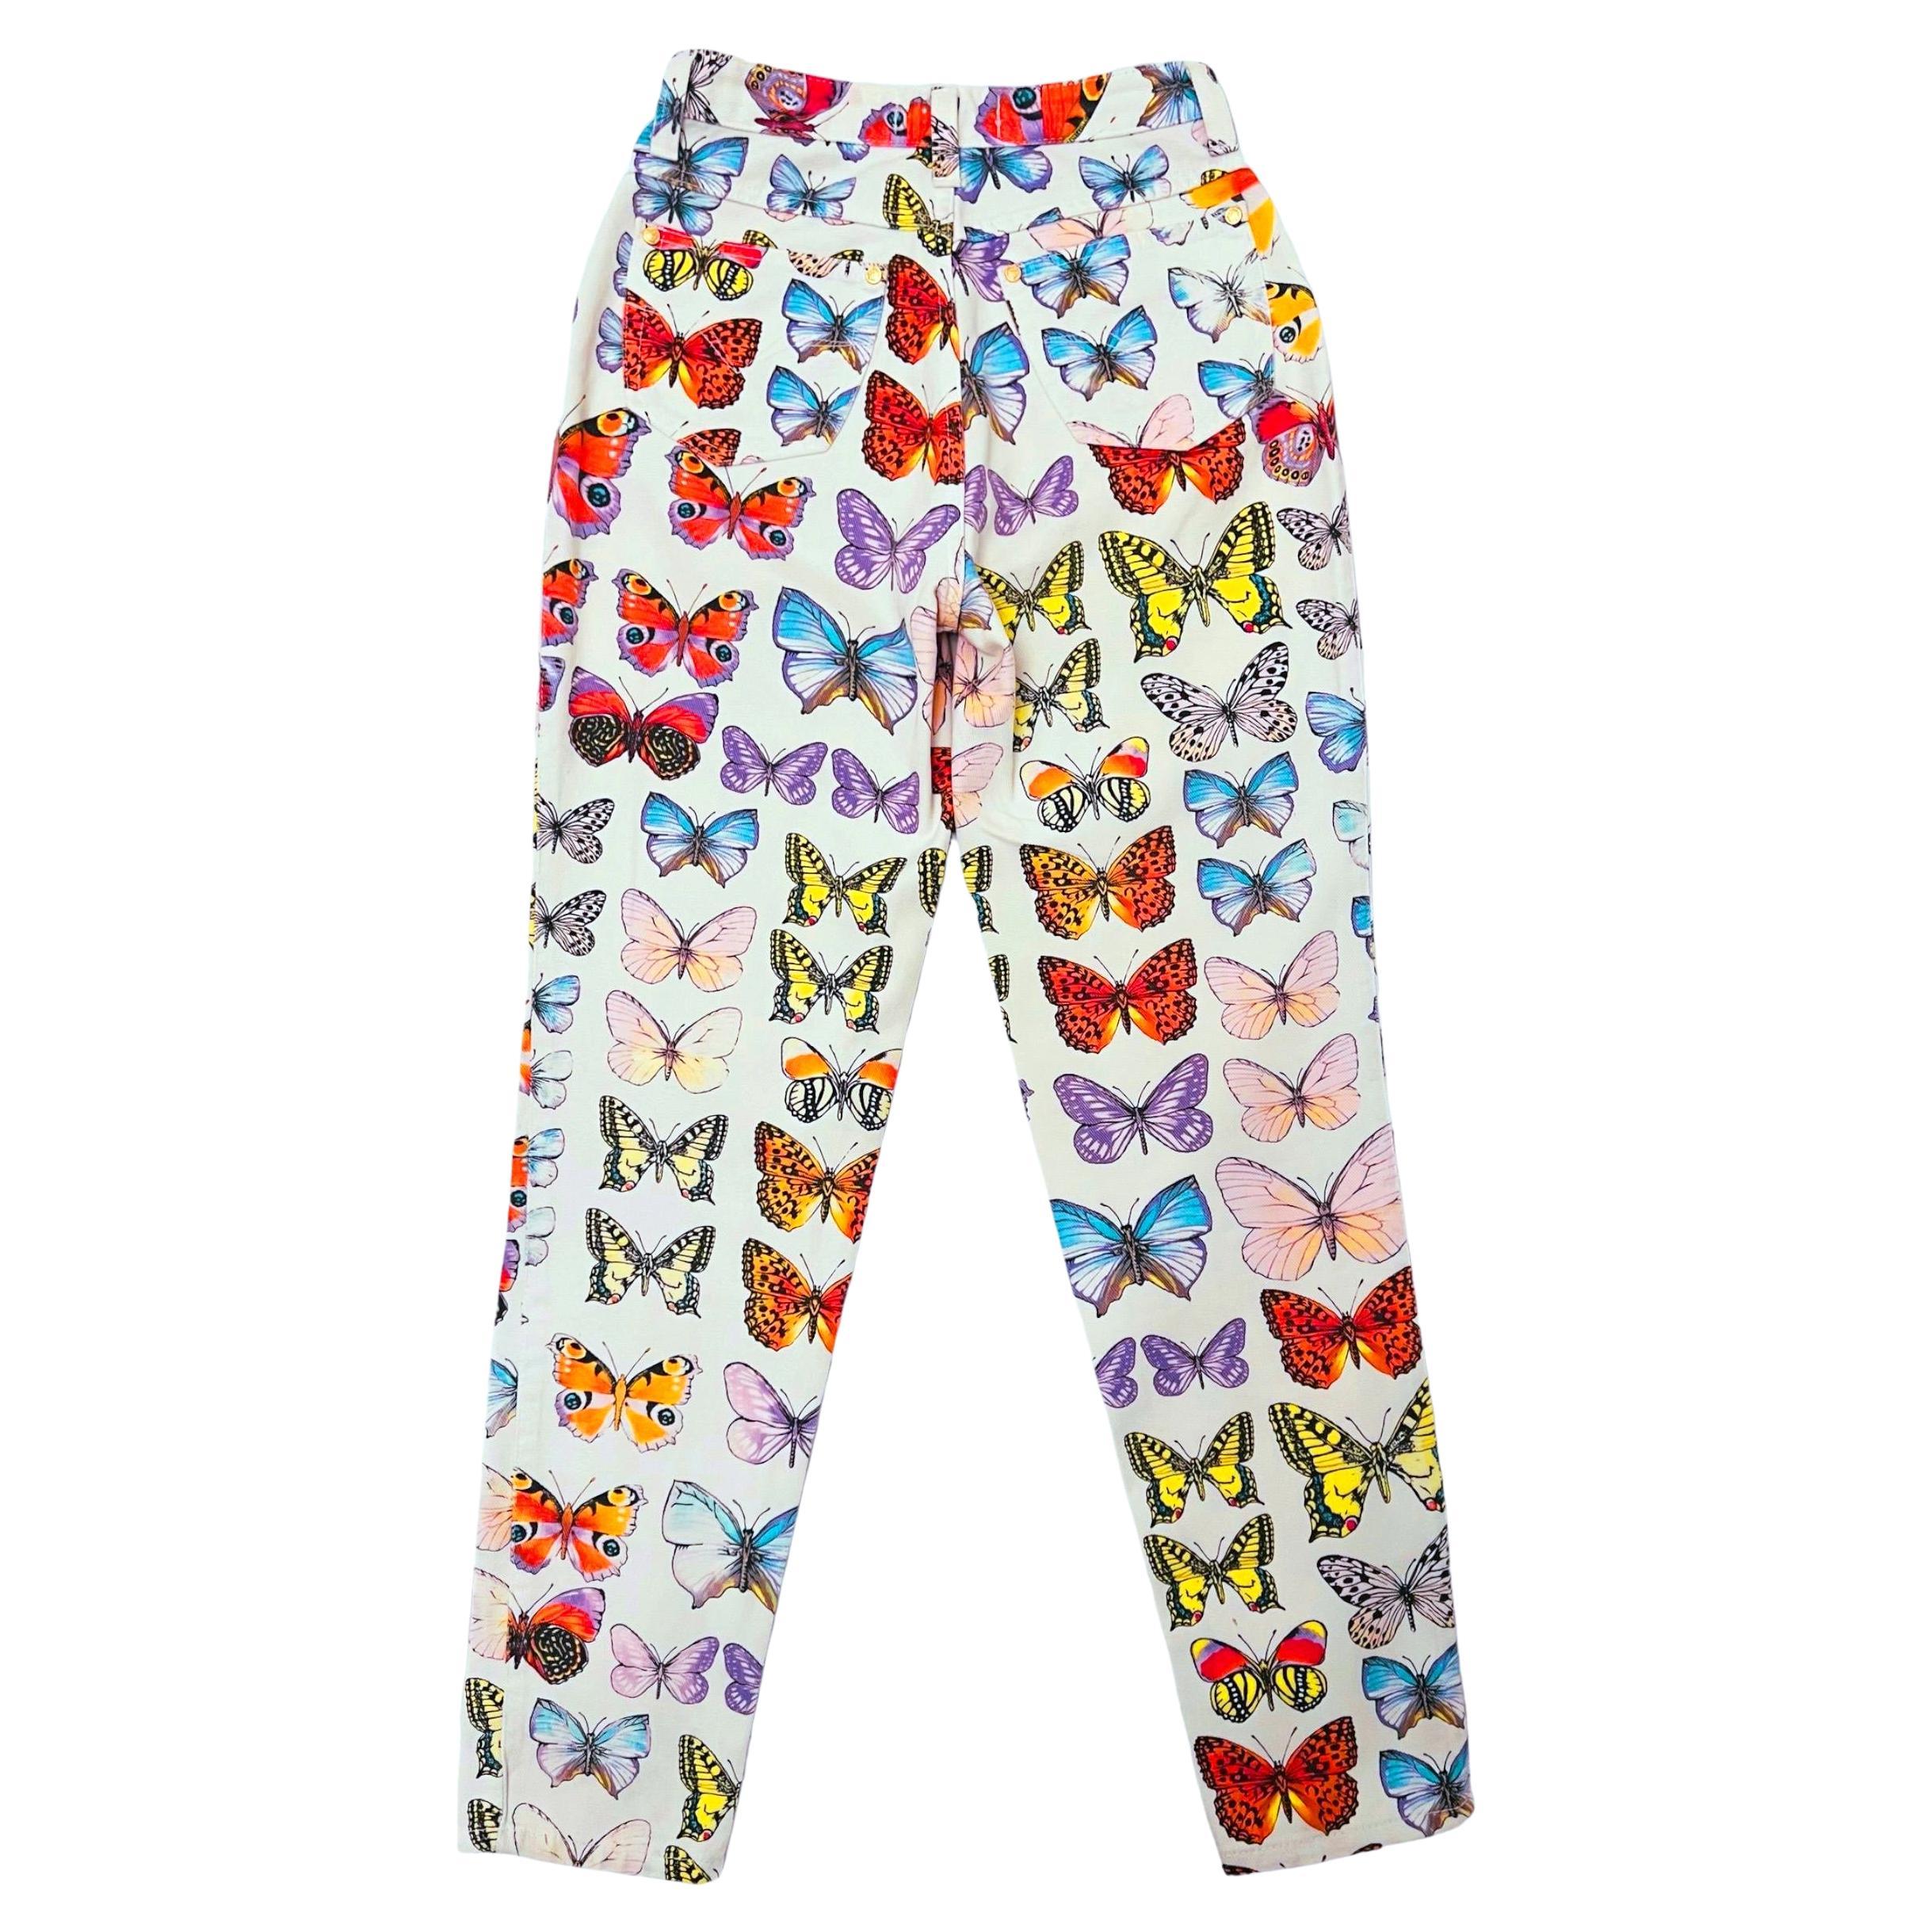 Versace butterfly print jeans from Spring Summer 1995.

White denim jeans printed with an energetic butterfly motif throughout.

Condition: Good condition. There are a few miniscule spots around the ankle. (Not noticeable because of the busy print)